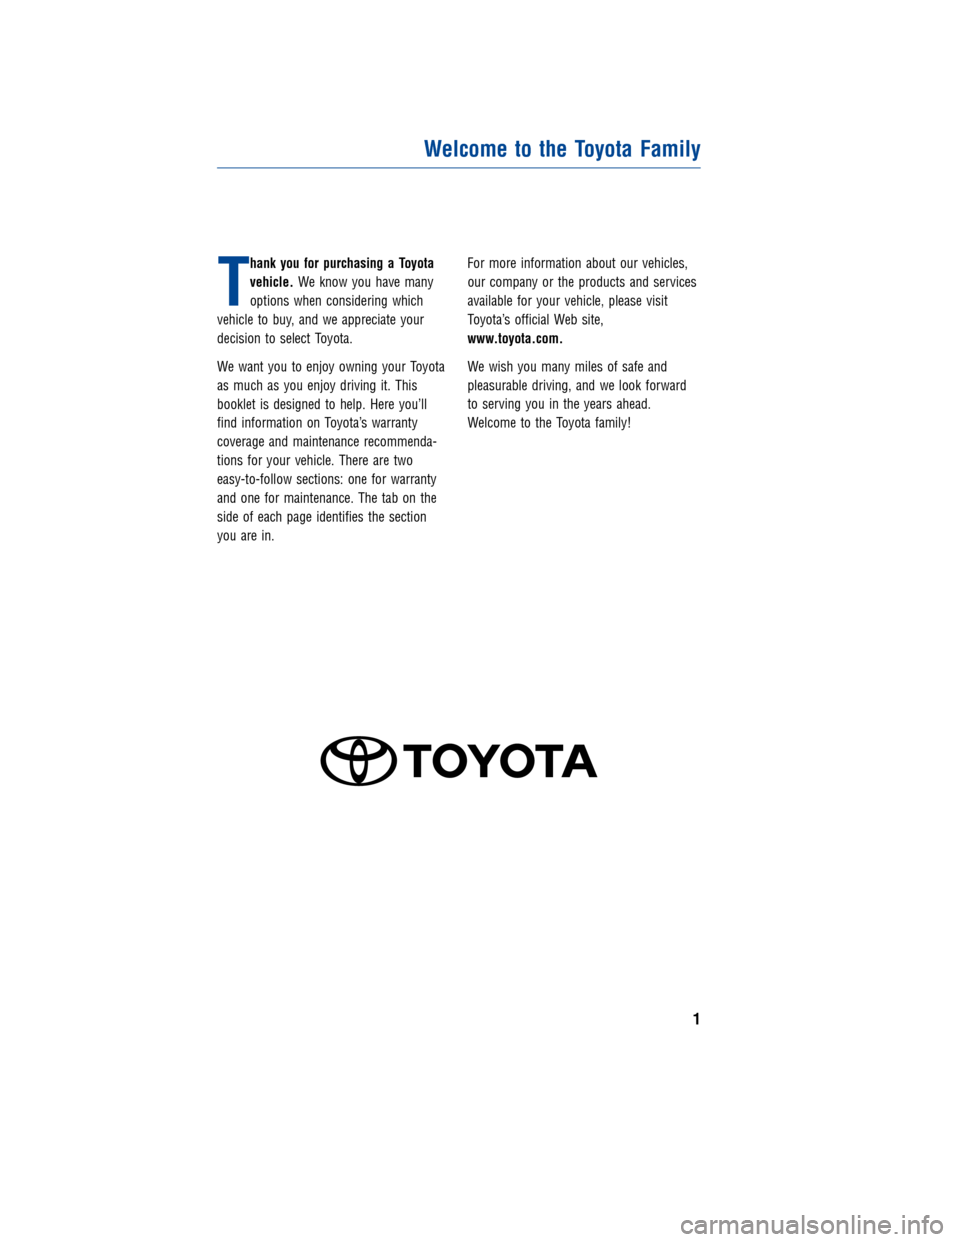 TOYOTA LAND CRUISER 2011 J200 Warranty And Maintenance Guide JOBNAME: 317281-2011-lnd-toyw PAGE: 1 SESS: 4 OUTPUT: Wed Jul 14 16:29:26 2010
/tweddle/toyota/sched-maint/317281-en-lnd/wg
T
hank you for purchasing a Toyota
vehicle.We know you have many
options whe